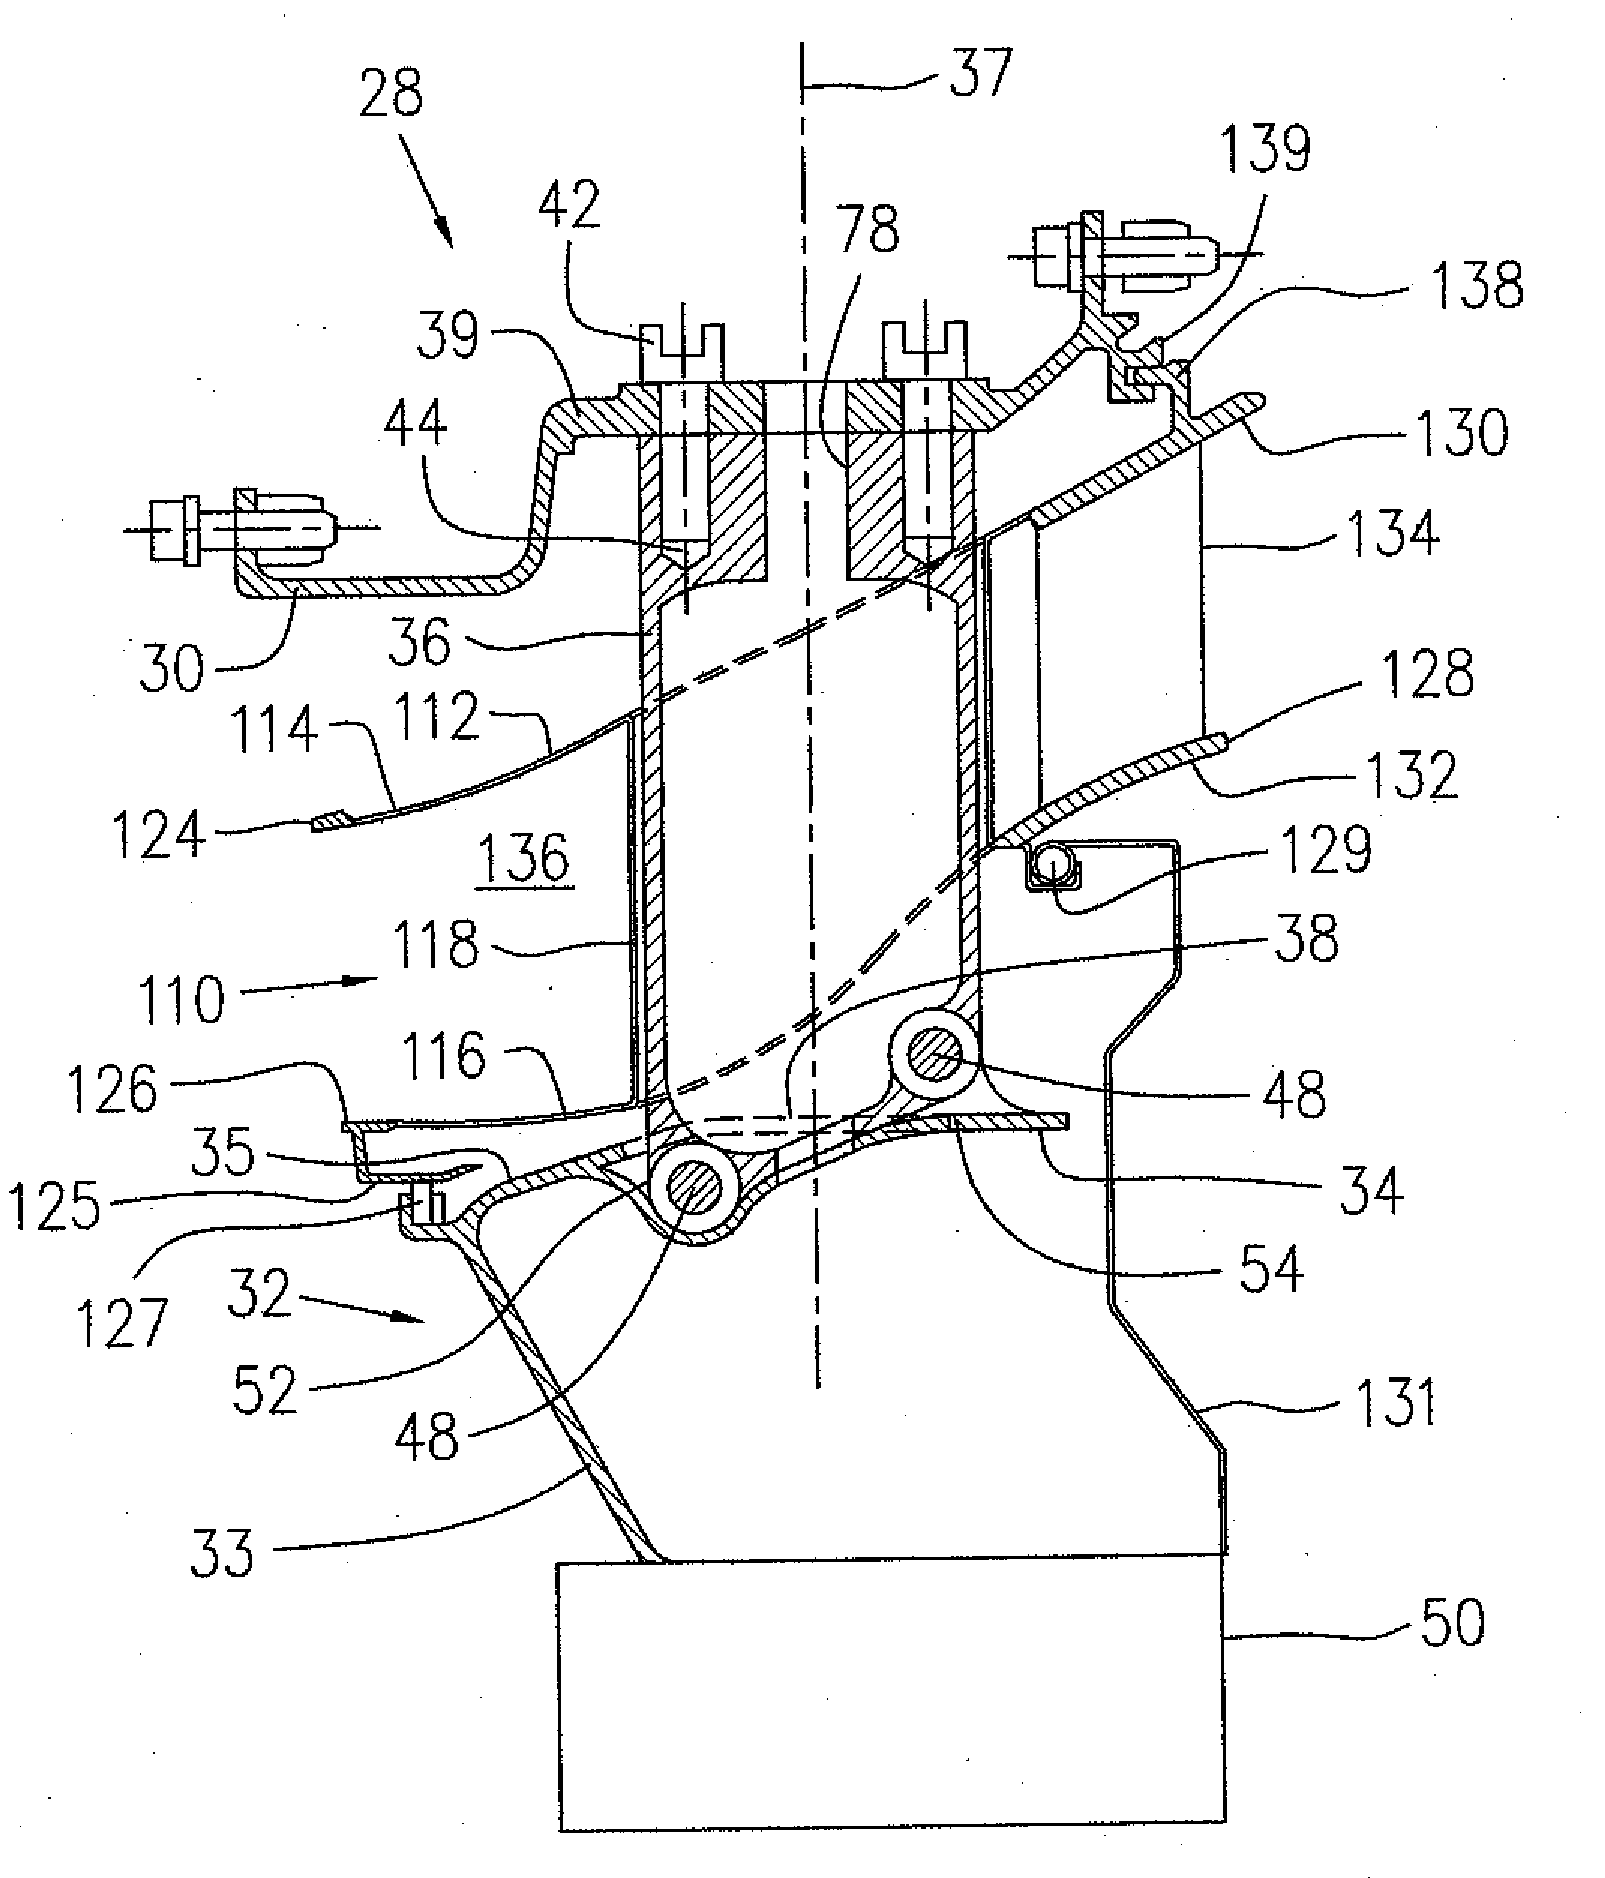 Fabricated itd-strut and vane ring for gas turbine engine